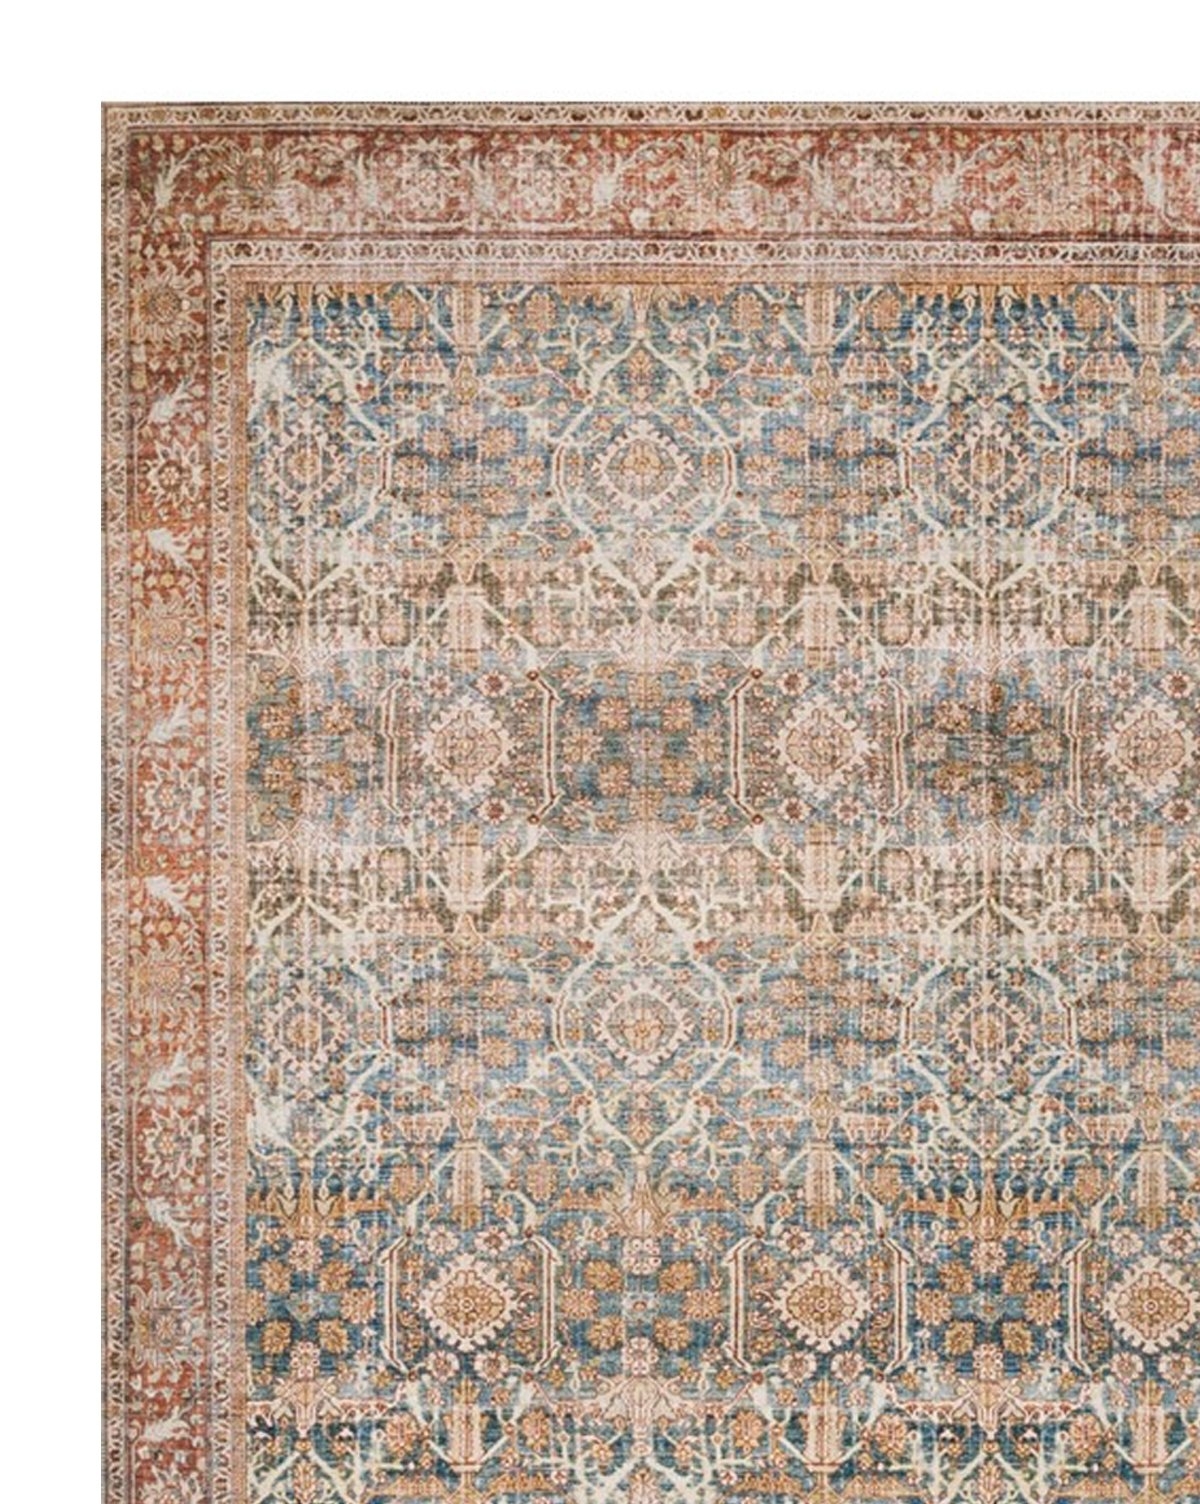 TUNIS PATTERNED RUG, 2'6" x 7'6" - Image 1